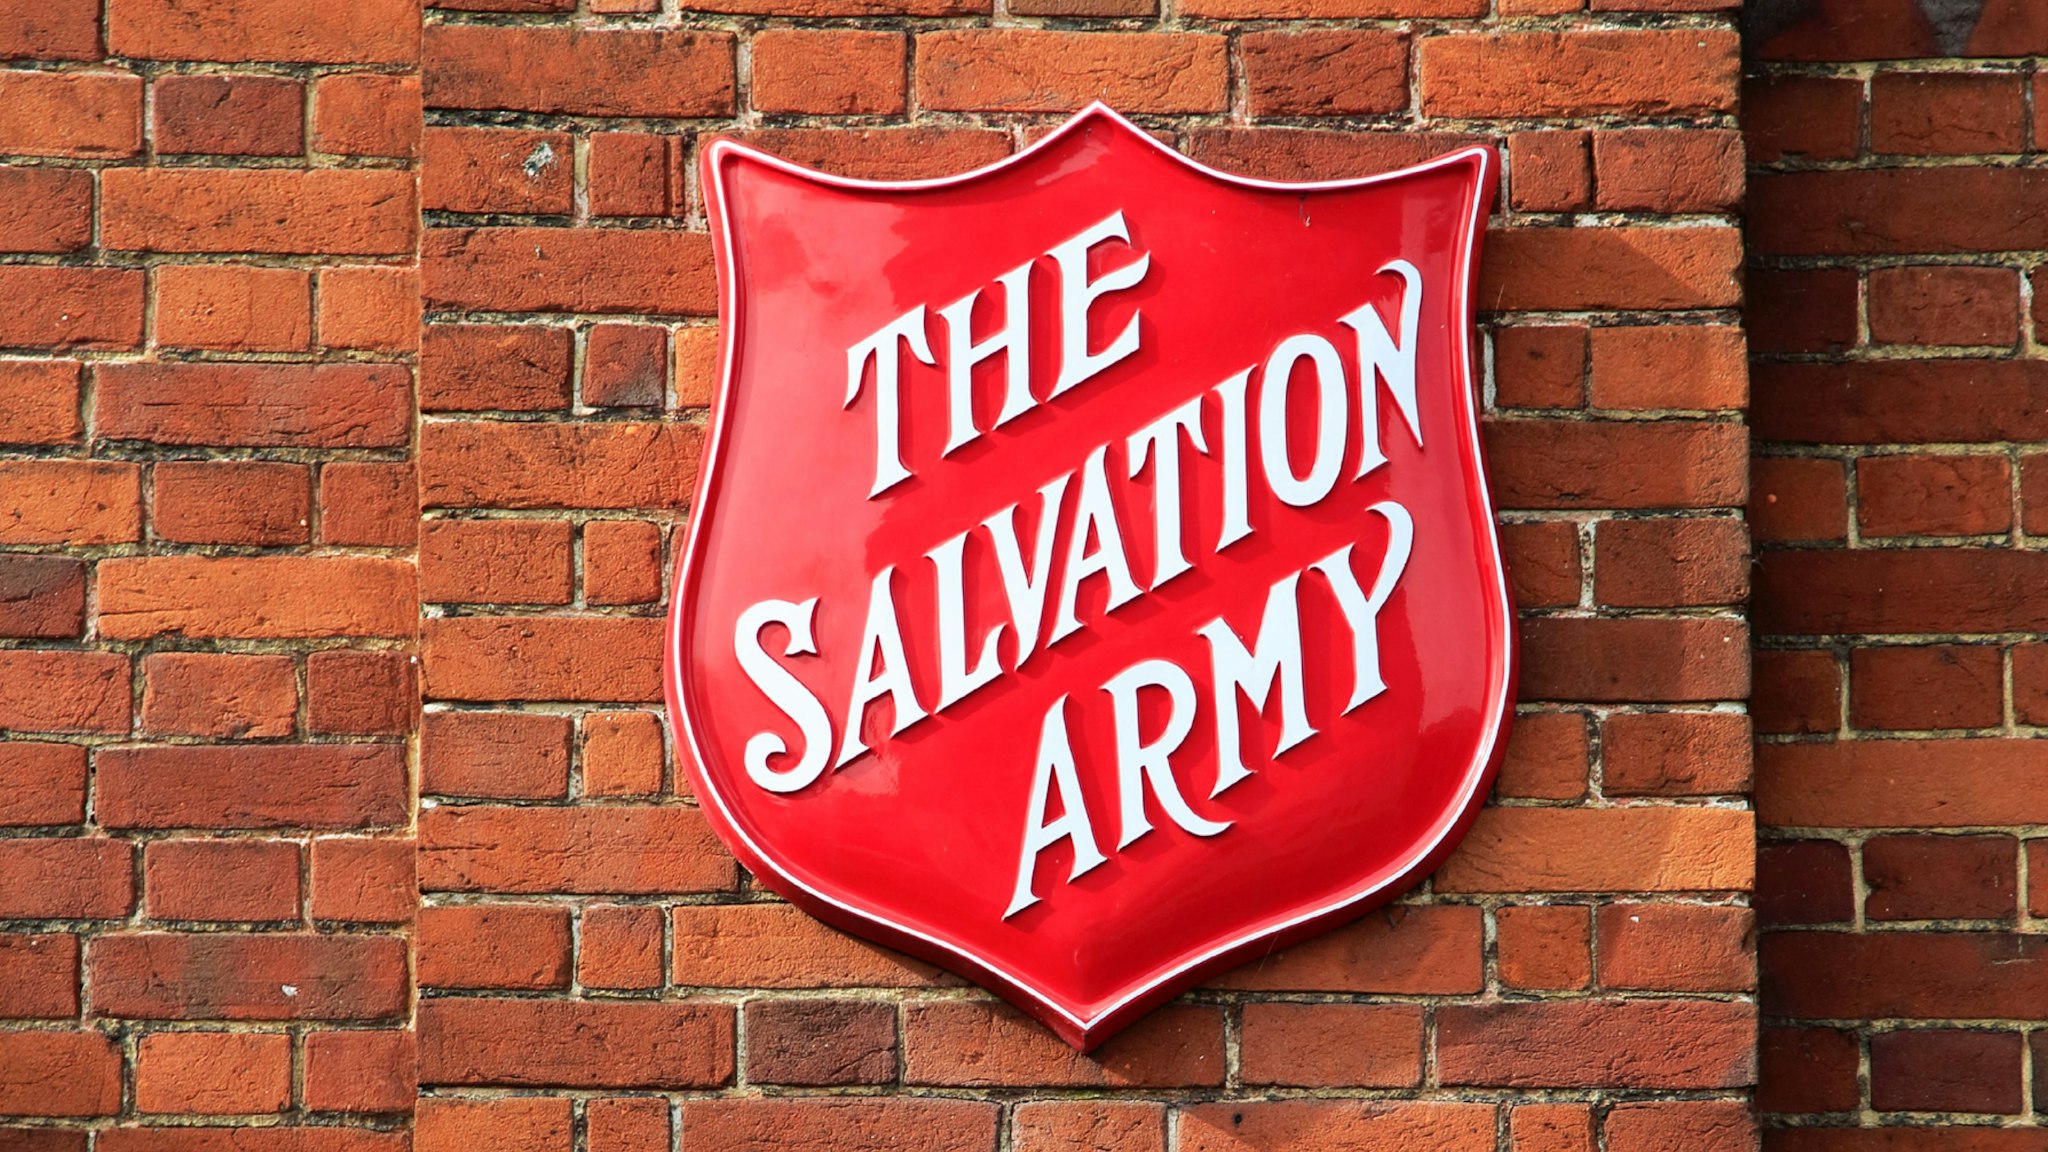 Salvation Army sign on brick wall, Andover, Hampshire, England.